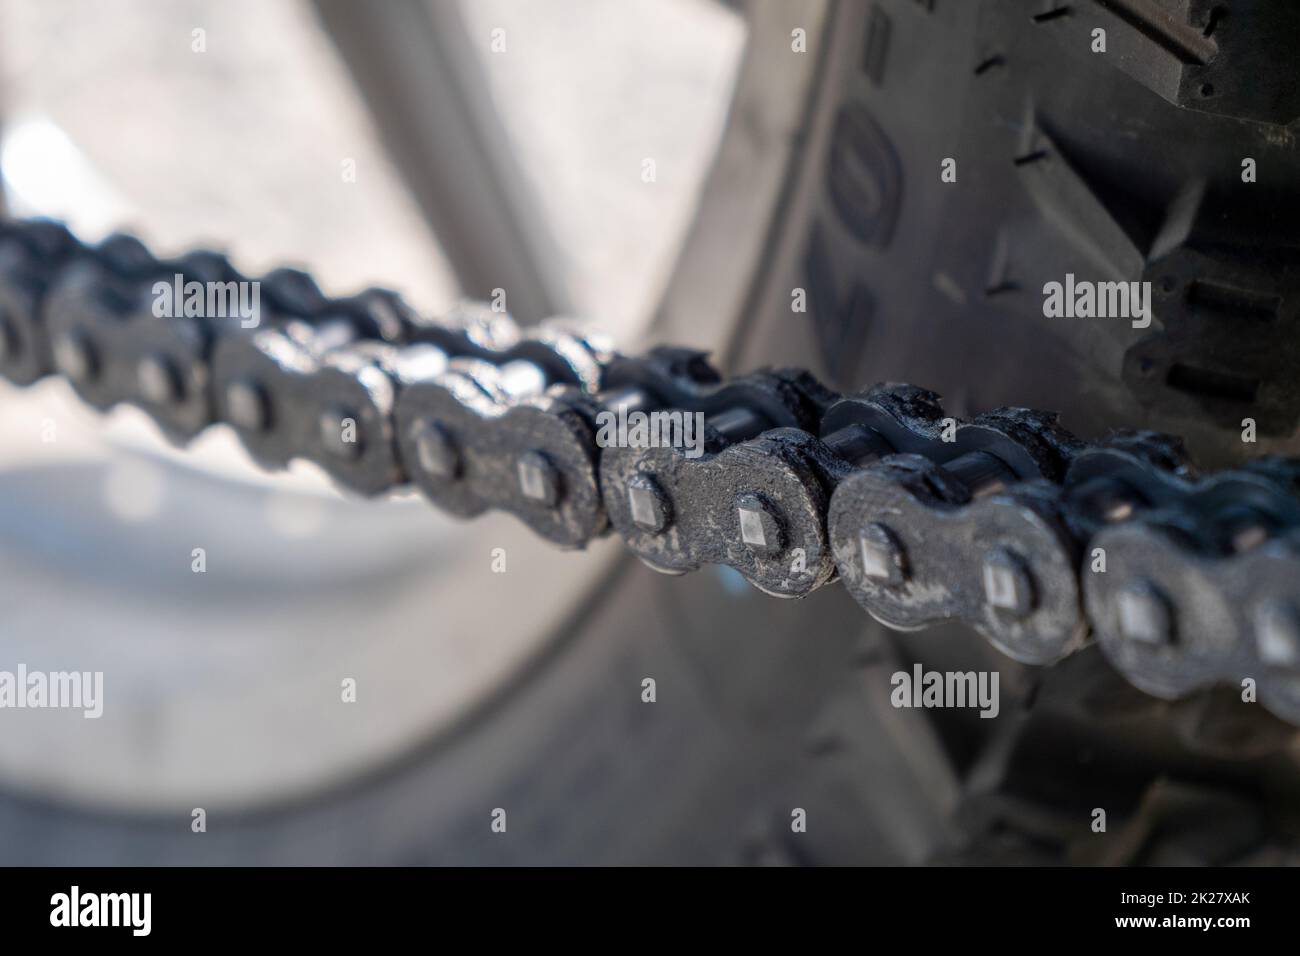 Close-up of motorcycle chain Stock Photo